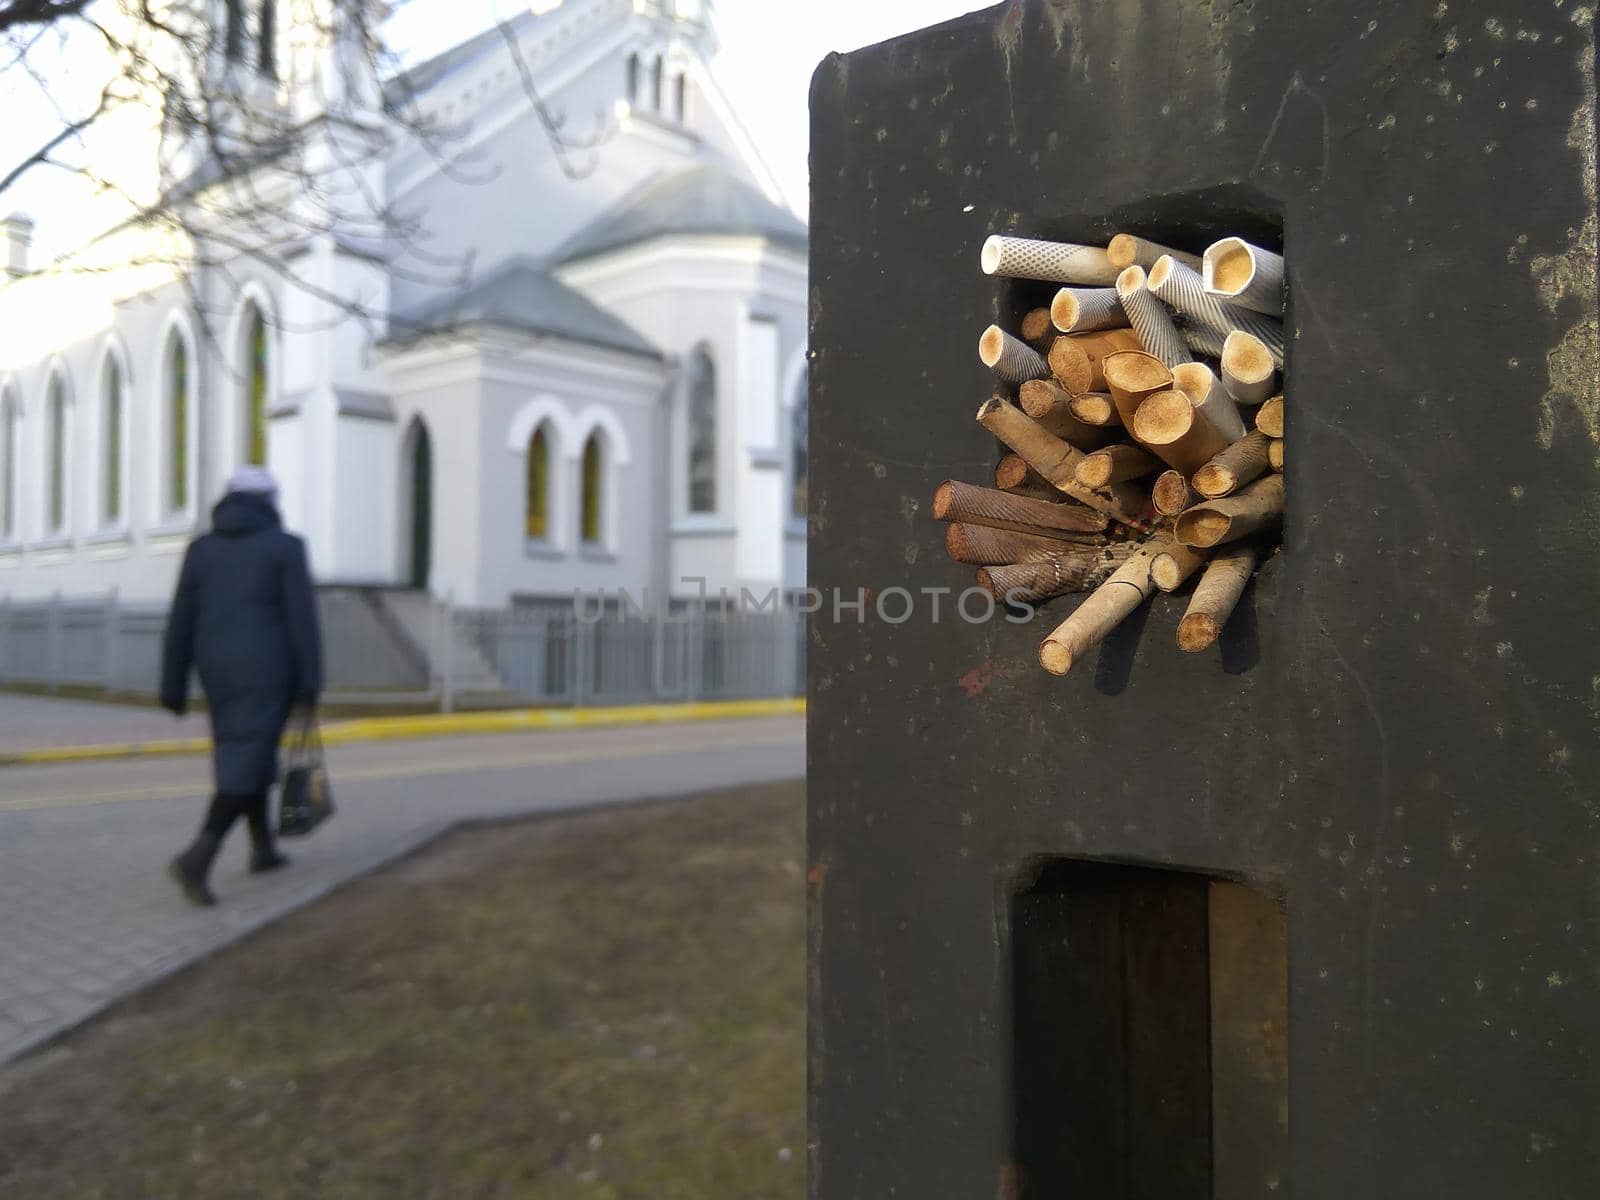 The element of the fence in which the parishioners of the Lutheran Church leave cigarette butts.